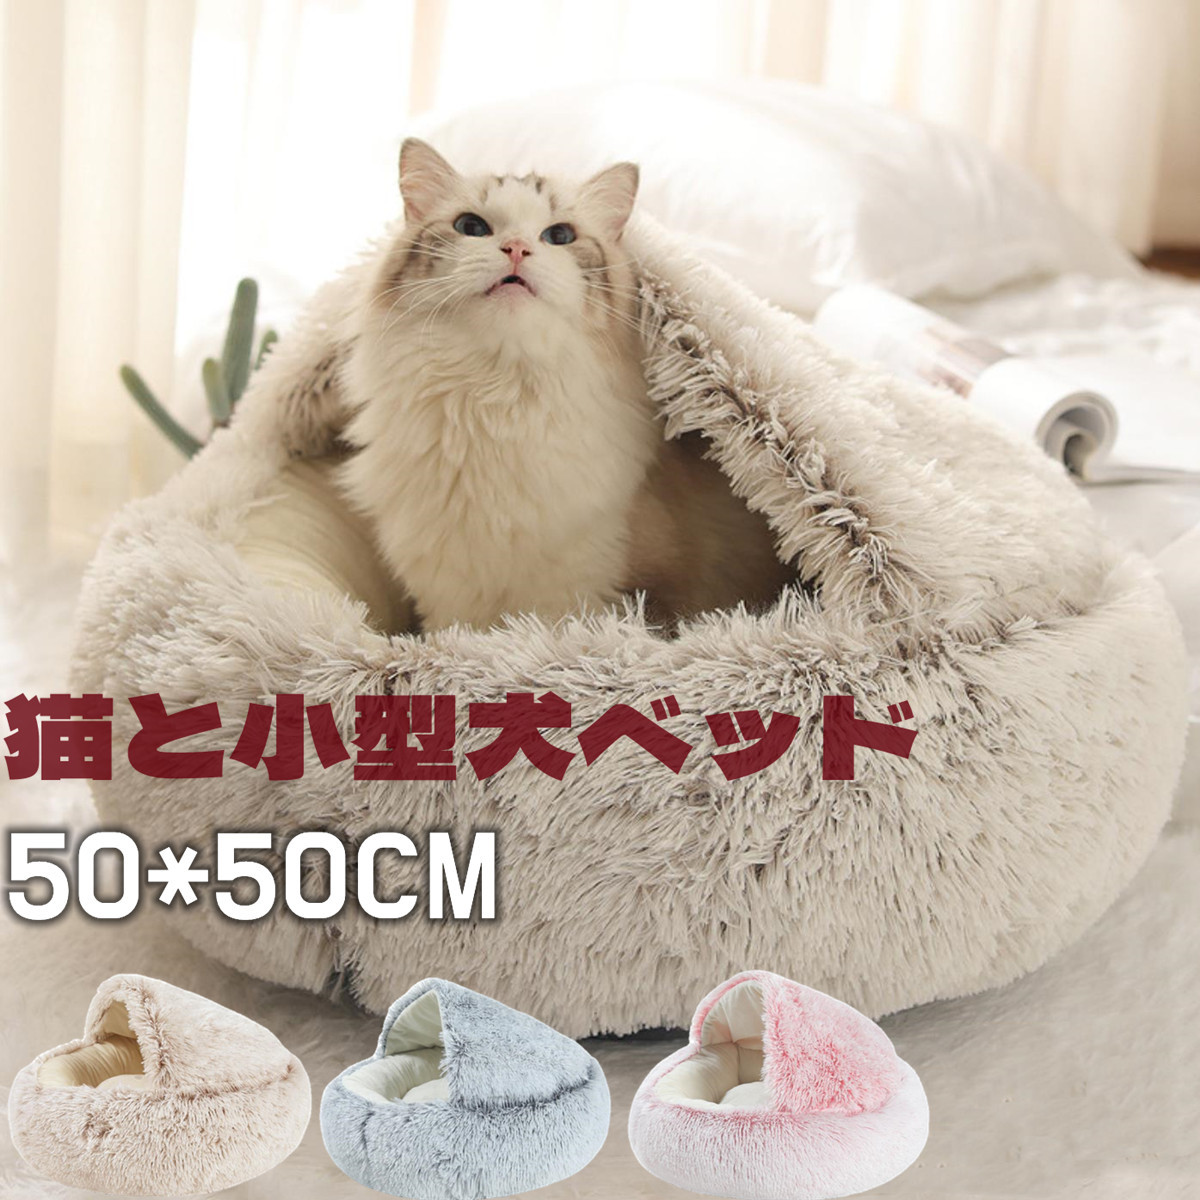  cat bed winter pet bed small medium sized dog cat cat bed house round pretty warm sleeping bag dok bed .... soft pet mat interior heat insulation protection against cold 